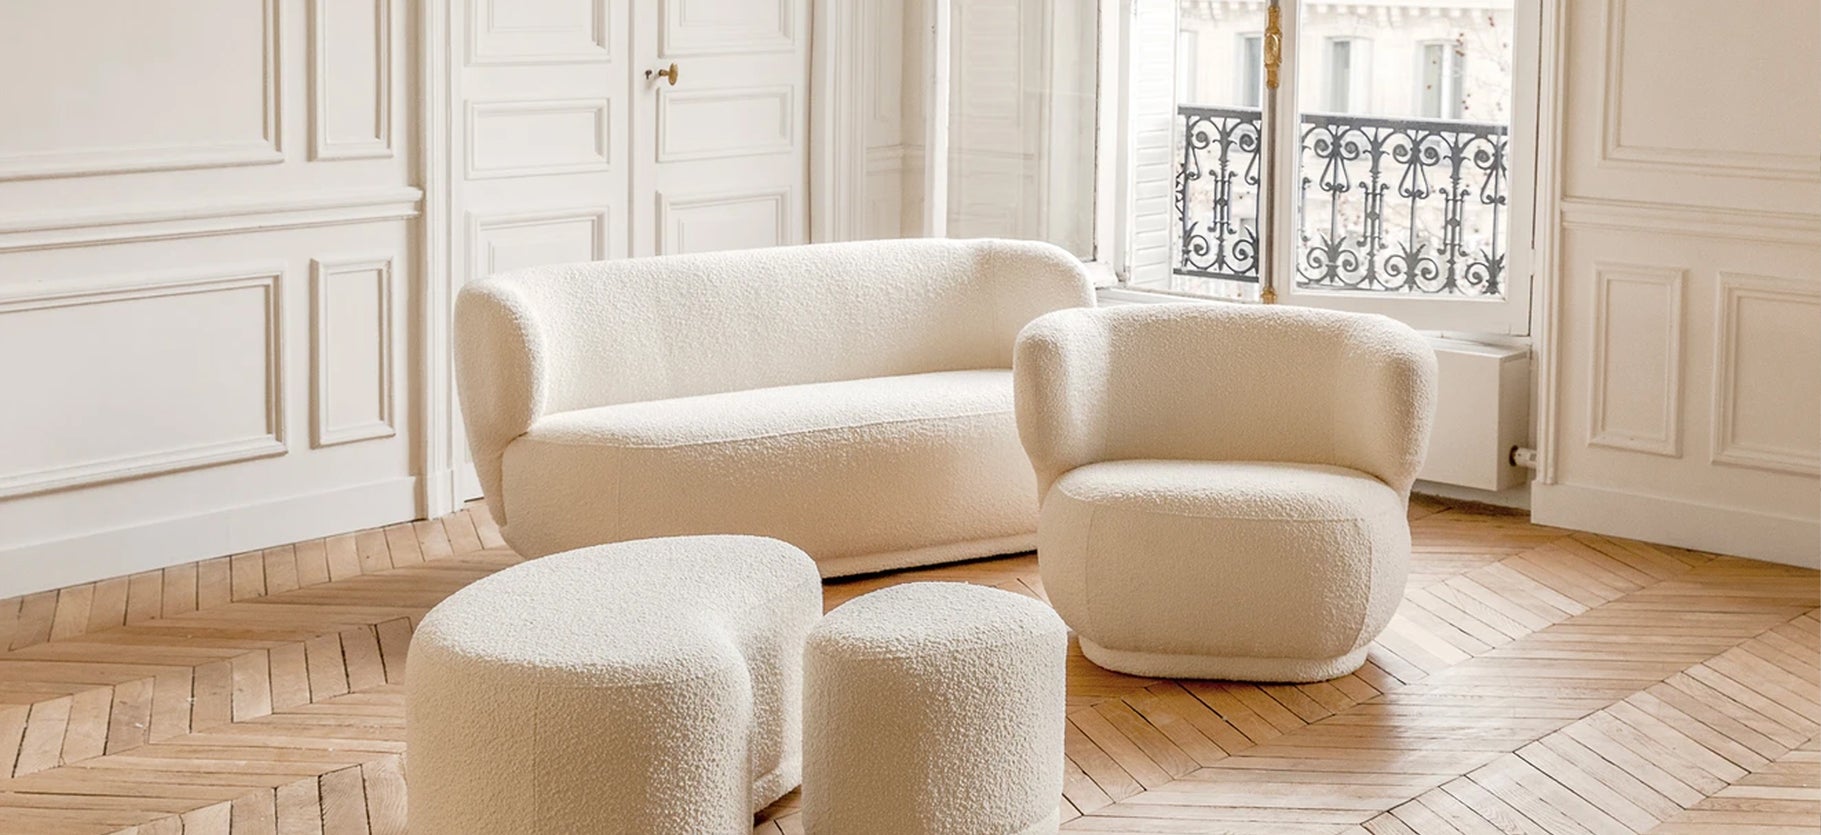 Inspiration GIULIA 2 Seater Sofas White Curly / Wood